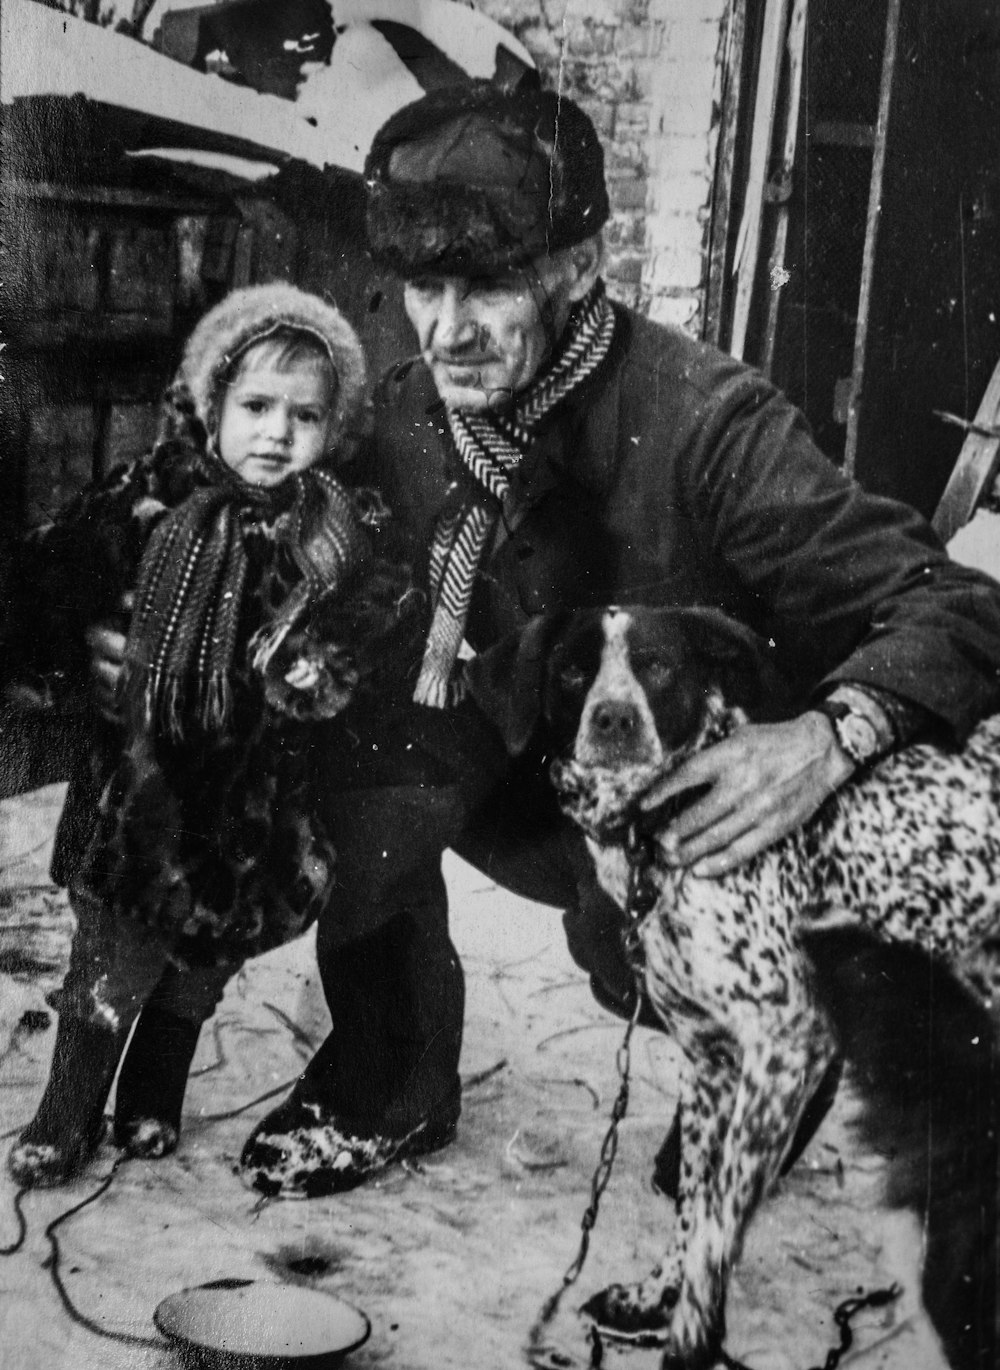 an old photo of a man and a child with a dog